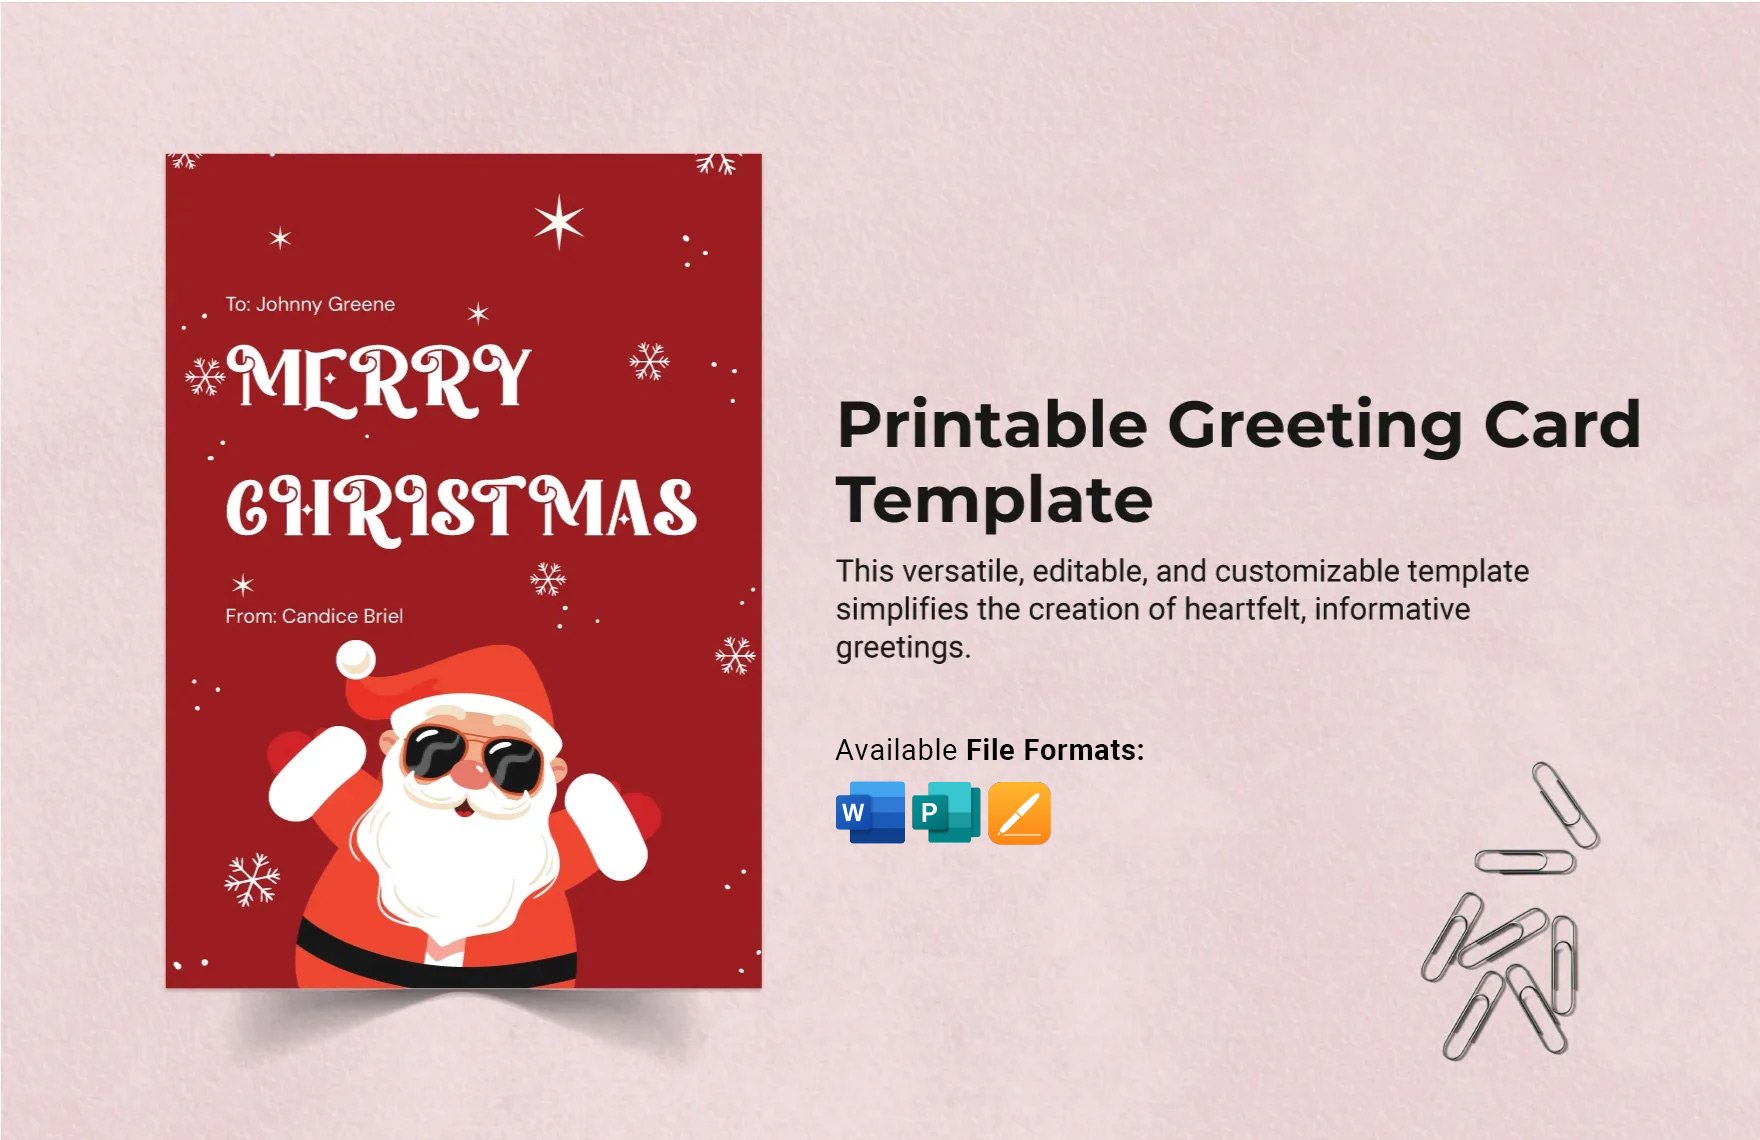 Free Printable Greeting Card Template in Word, Apple Pages, Publisher